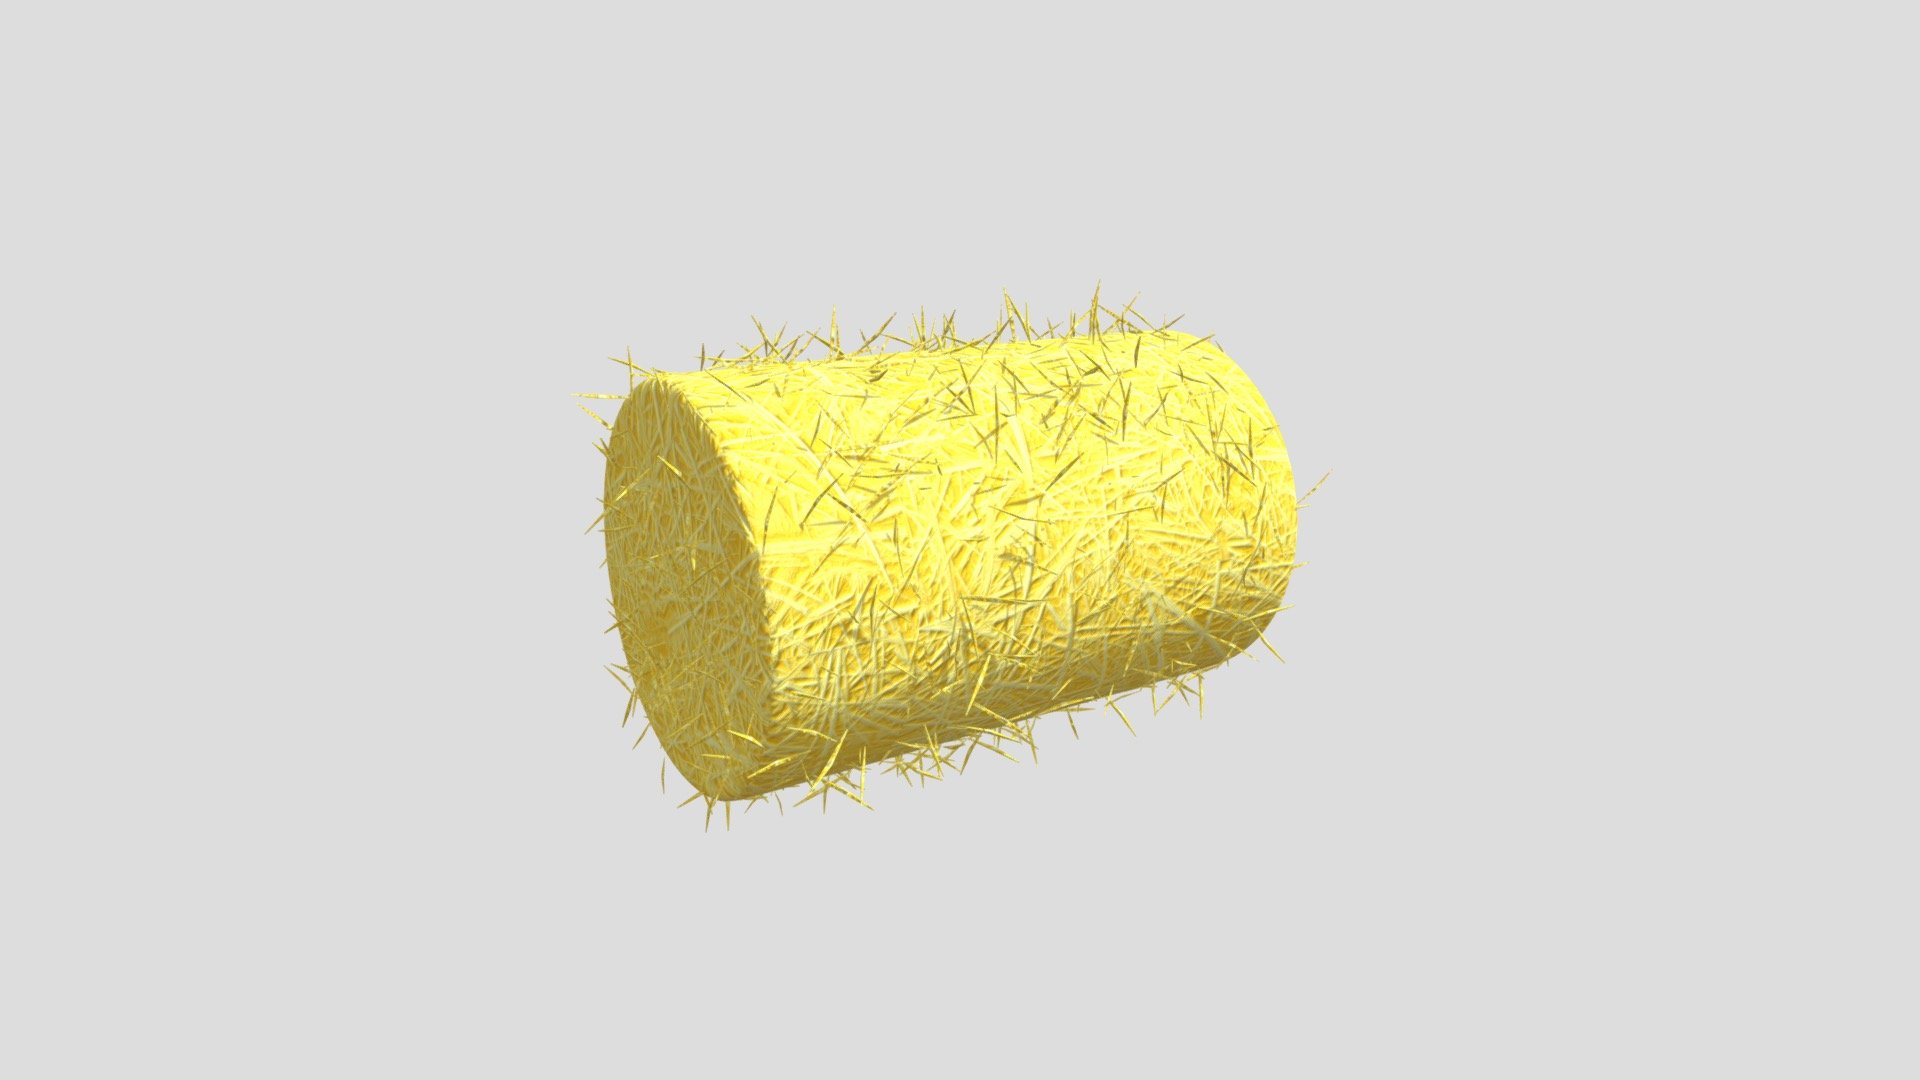 Textures: 1024 × 1024, Two colors on texture: yellow, dark yellow.

Has Normal Map: 1024 × 1024.

Materials: 1 - Hay

Smooth and flat shaded.

Mirrored.

Subdivision Level: 1

Origin located on middle-center.

Polygons: 24756

Vertices: 14382

Formats: Fbx, Obj, Stl, Dae.

I hope you enjoy the model! - Hay Roll - Buy Royalty Free 3D model by ED+ (@EDplus) 3d model